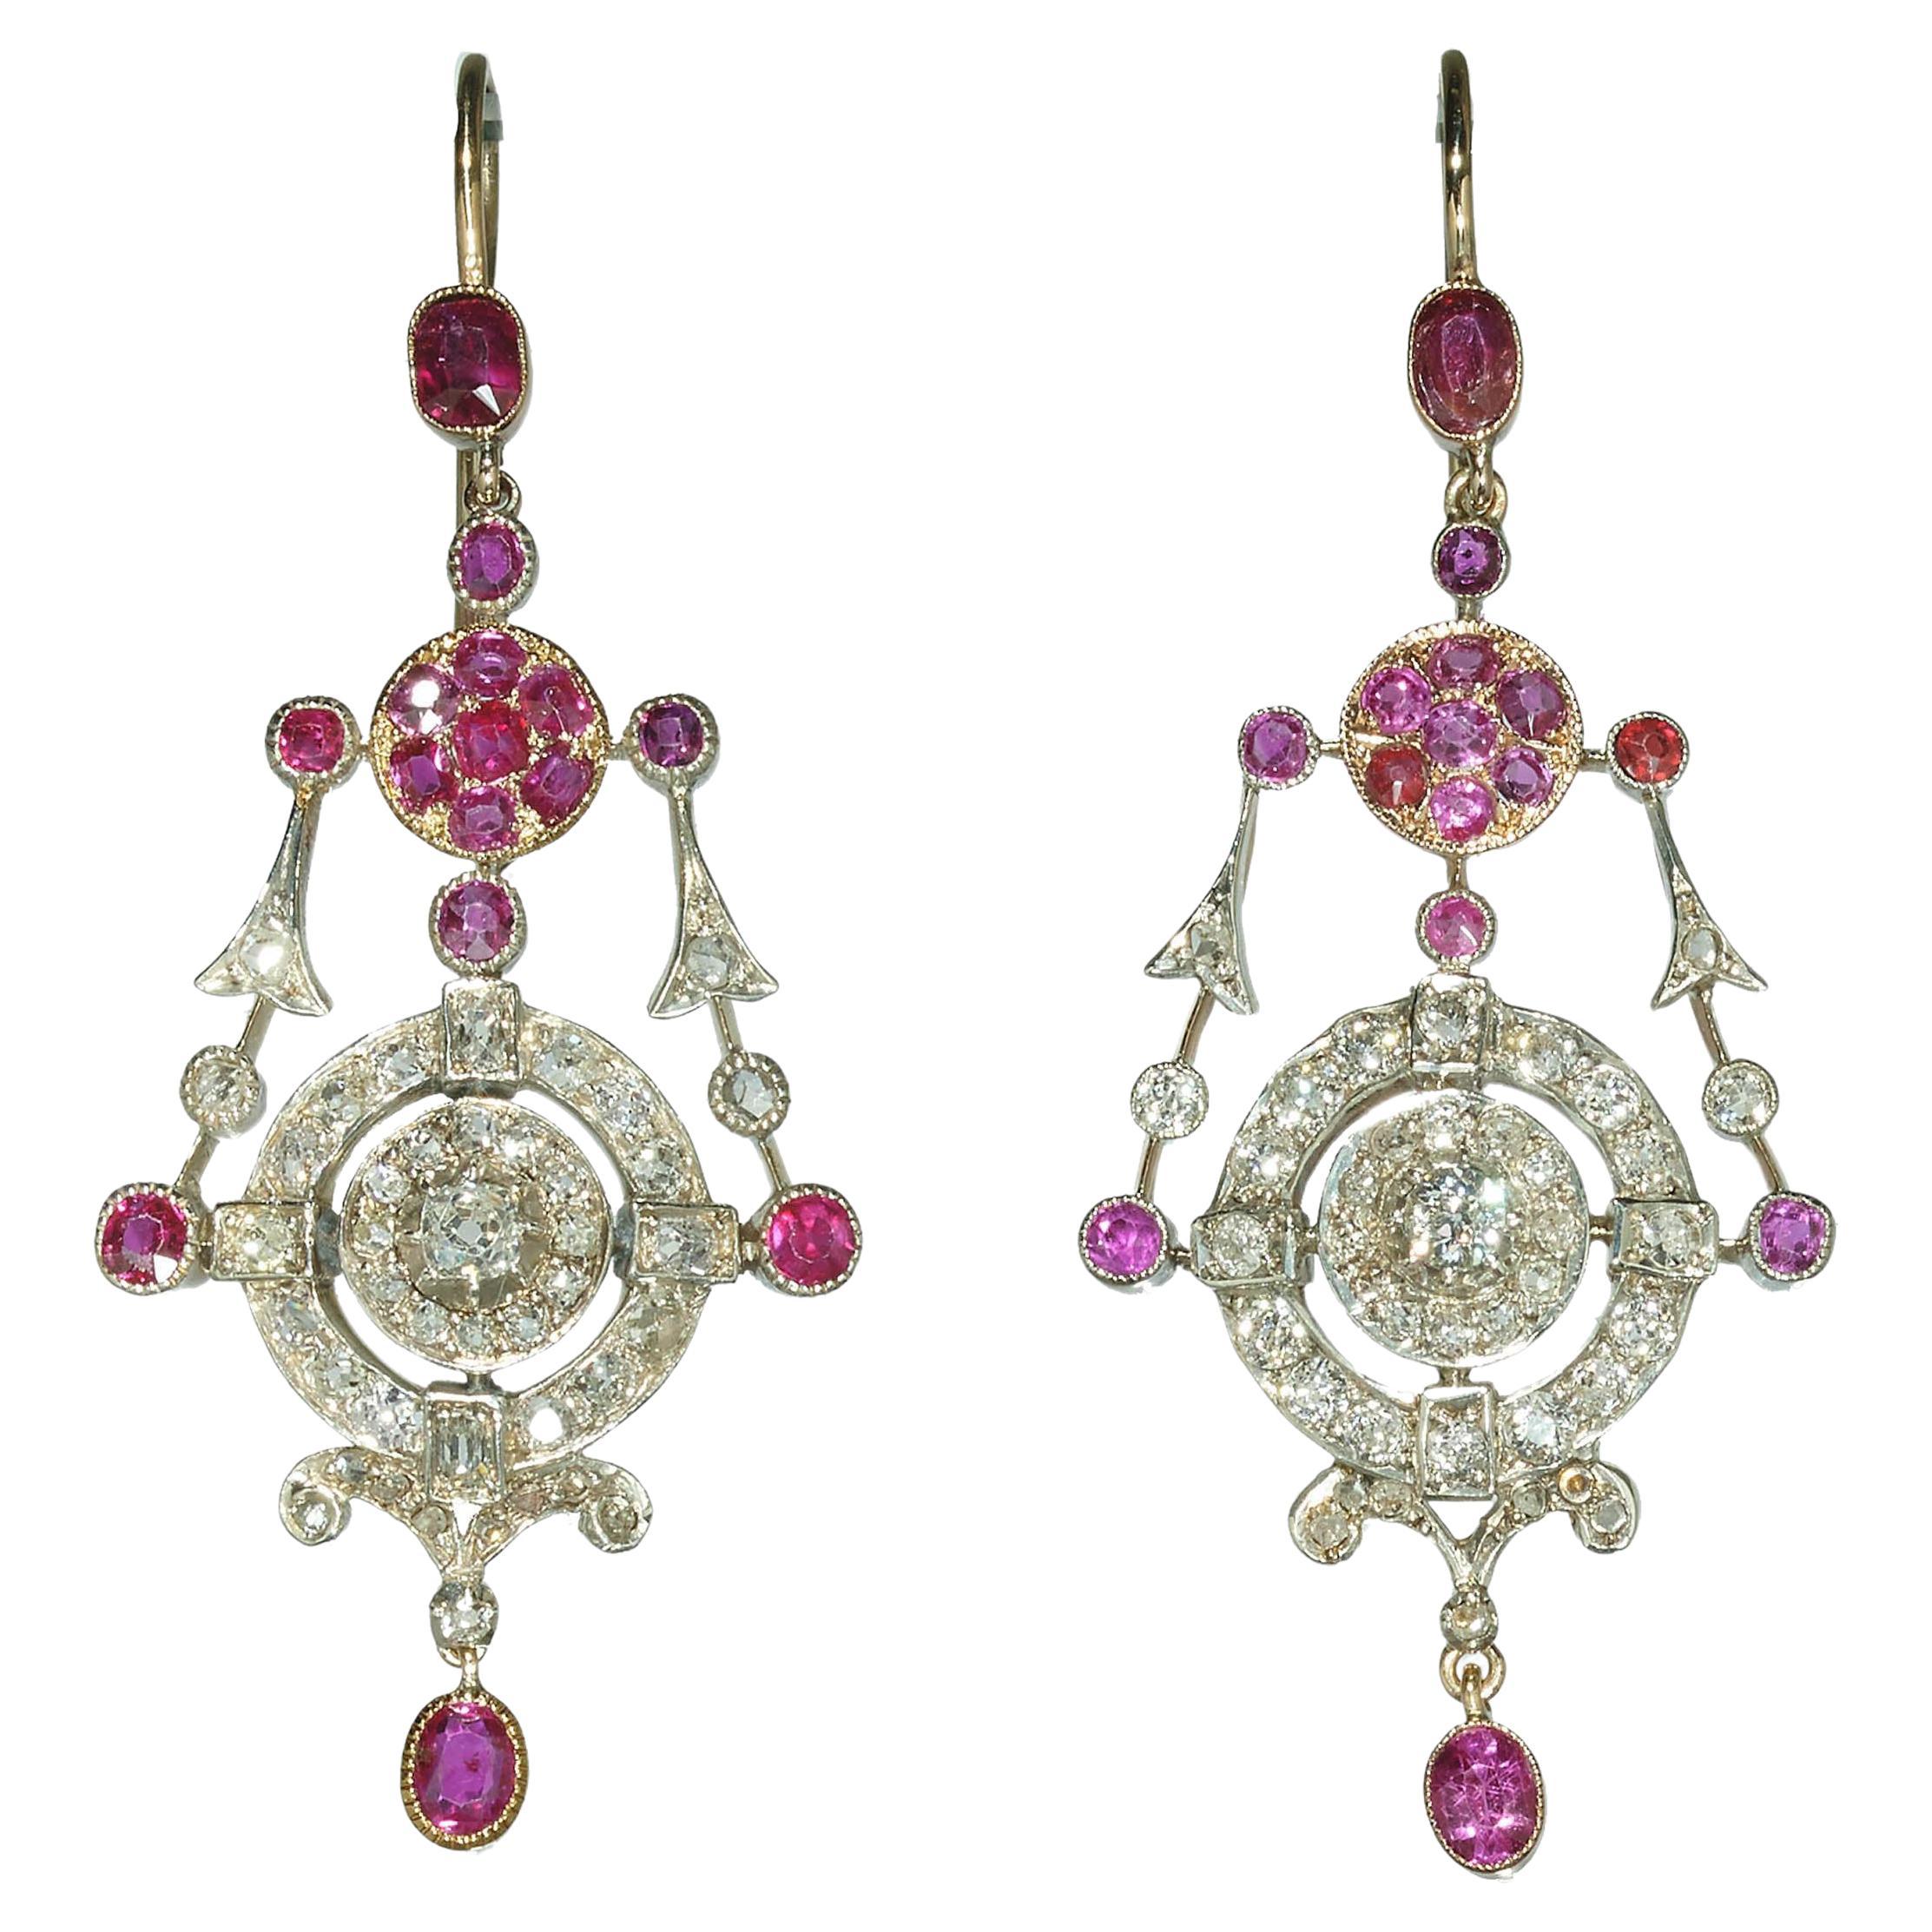 Antique Ruby, Diamond, Silver And Gold Drop Earrings, Circa 1880